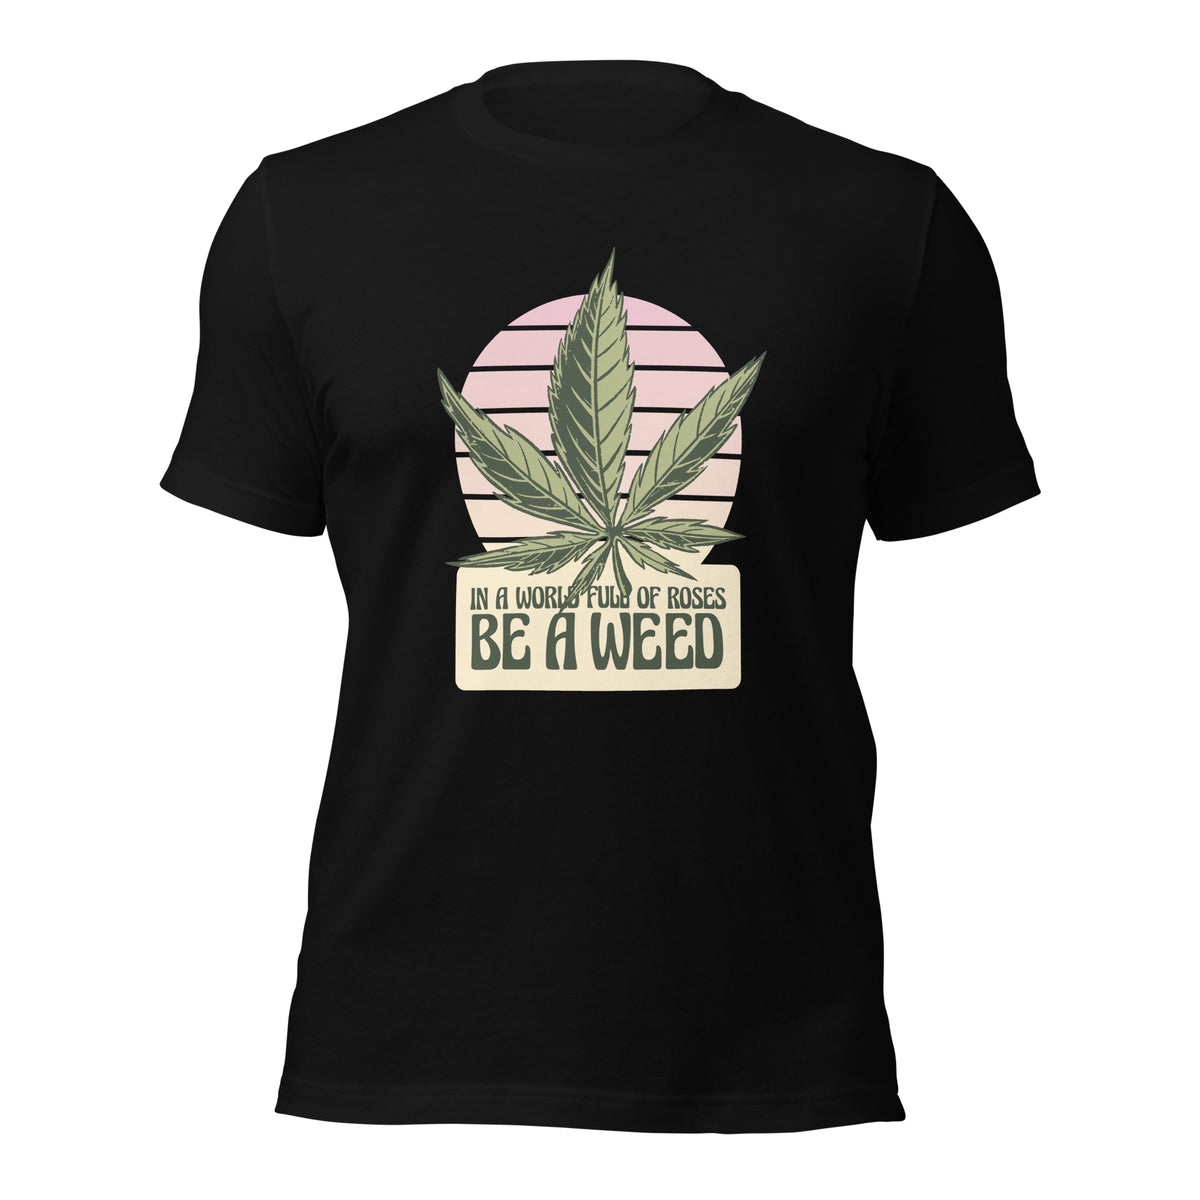 In a world of roses, be a weed Unisex T-shirt